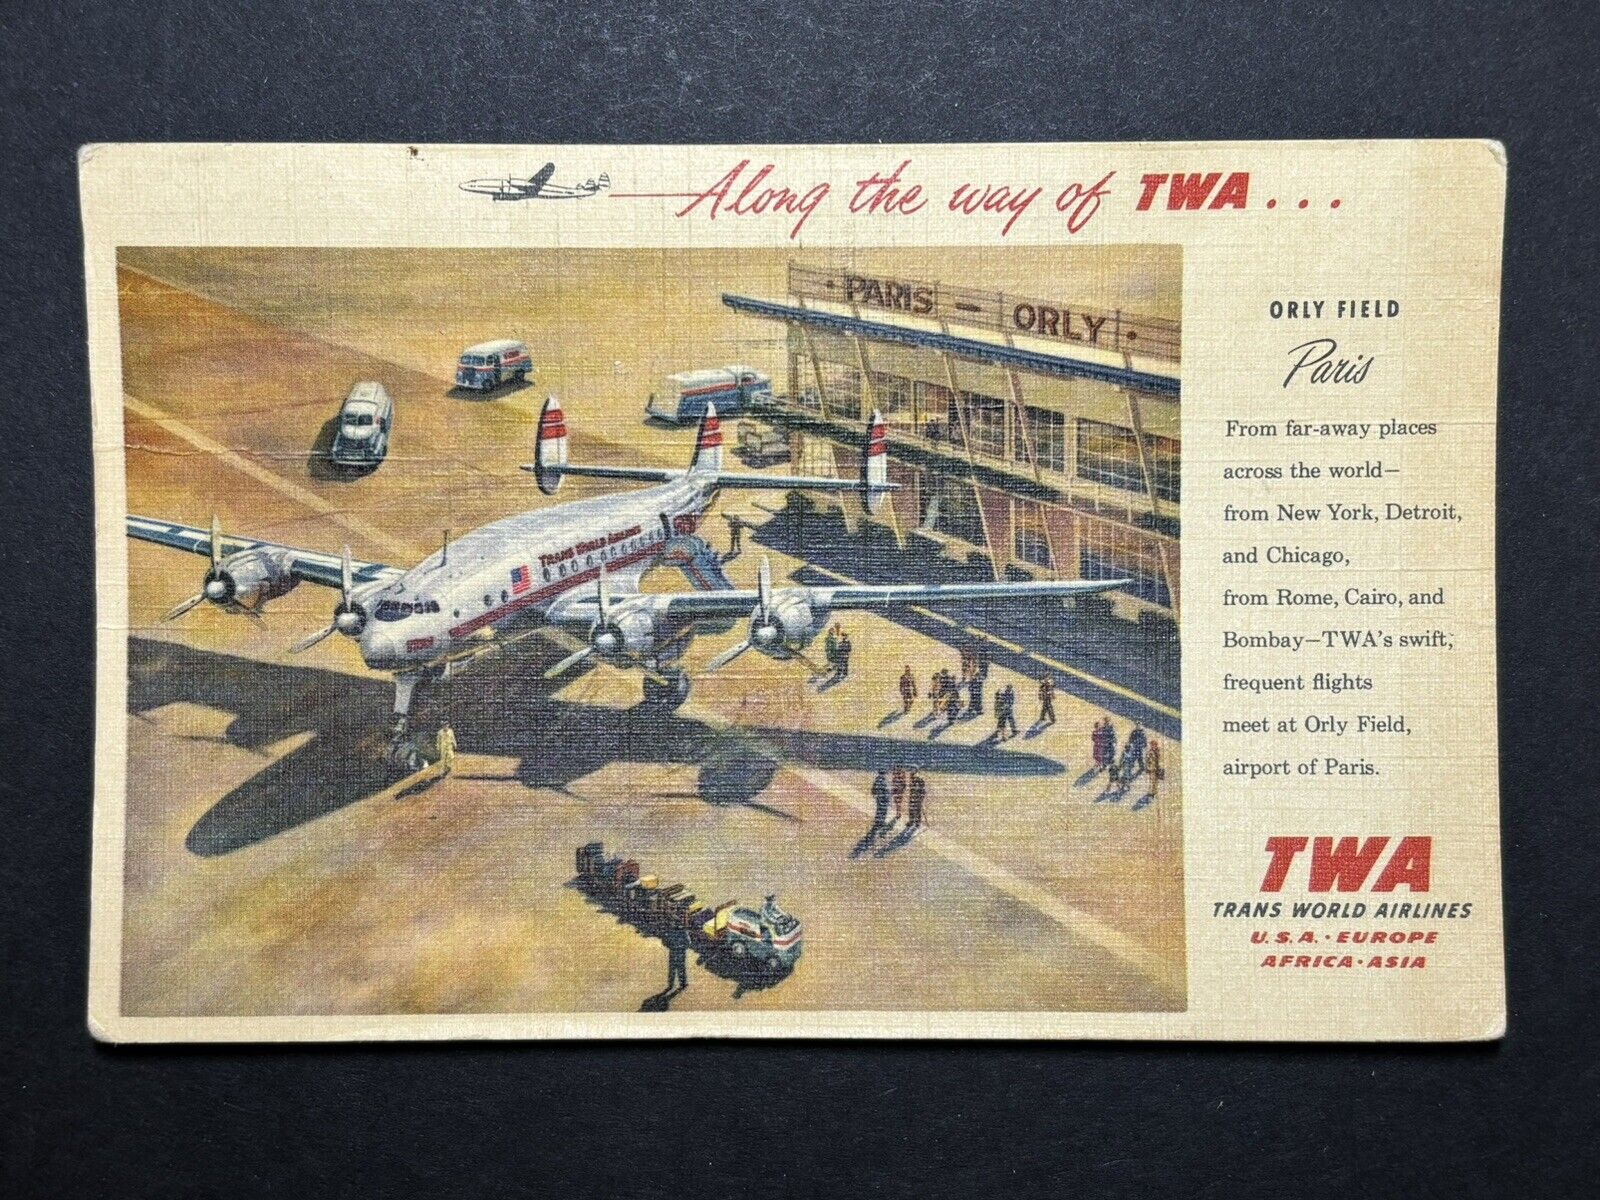 Vintage POSTCARD: 1957 TWA - Orly Field Paris France - Trans World Airlines